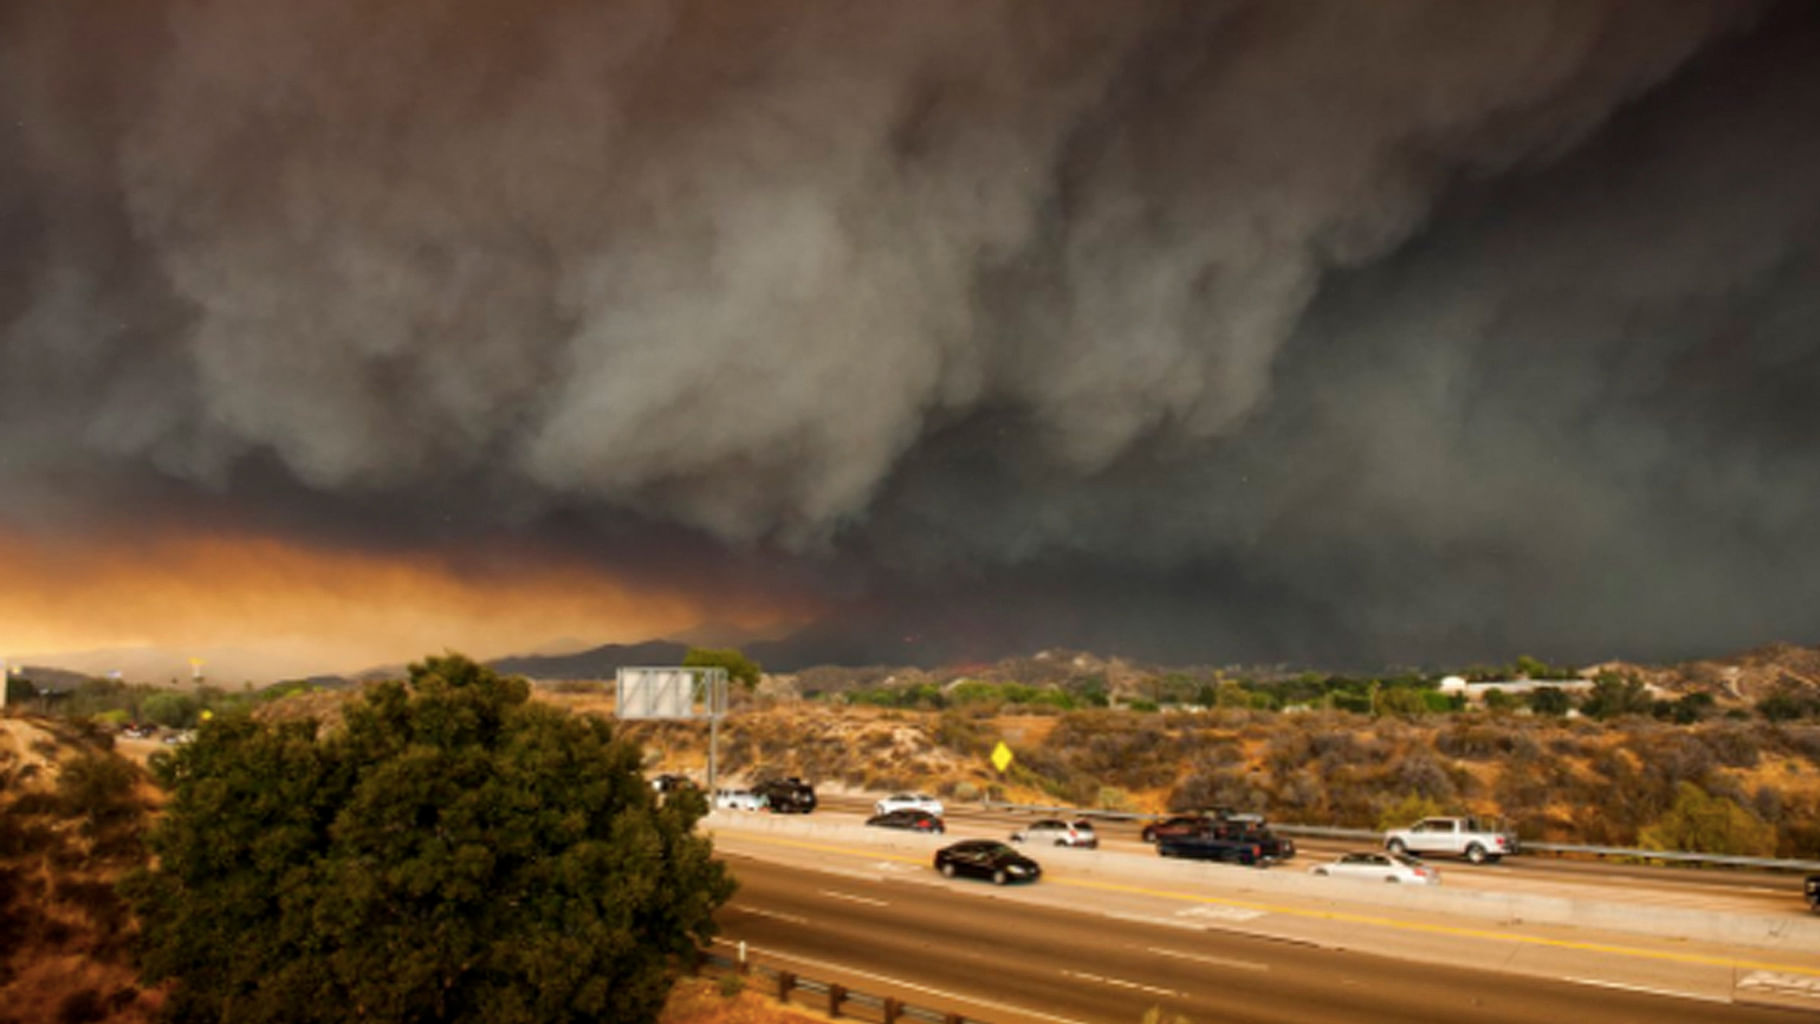 The California sand fire has spread to more than 20,000 hectares, as of Saturday, 23 July, 2016. (Photo courtesy: Twitter/<a href="https://twitter.com/SCVSignal/status/757030613341708289">SCV Signal</a>)